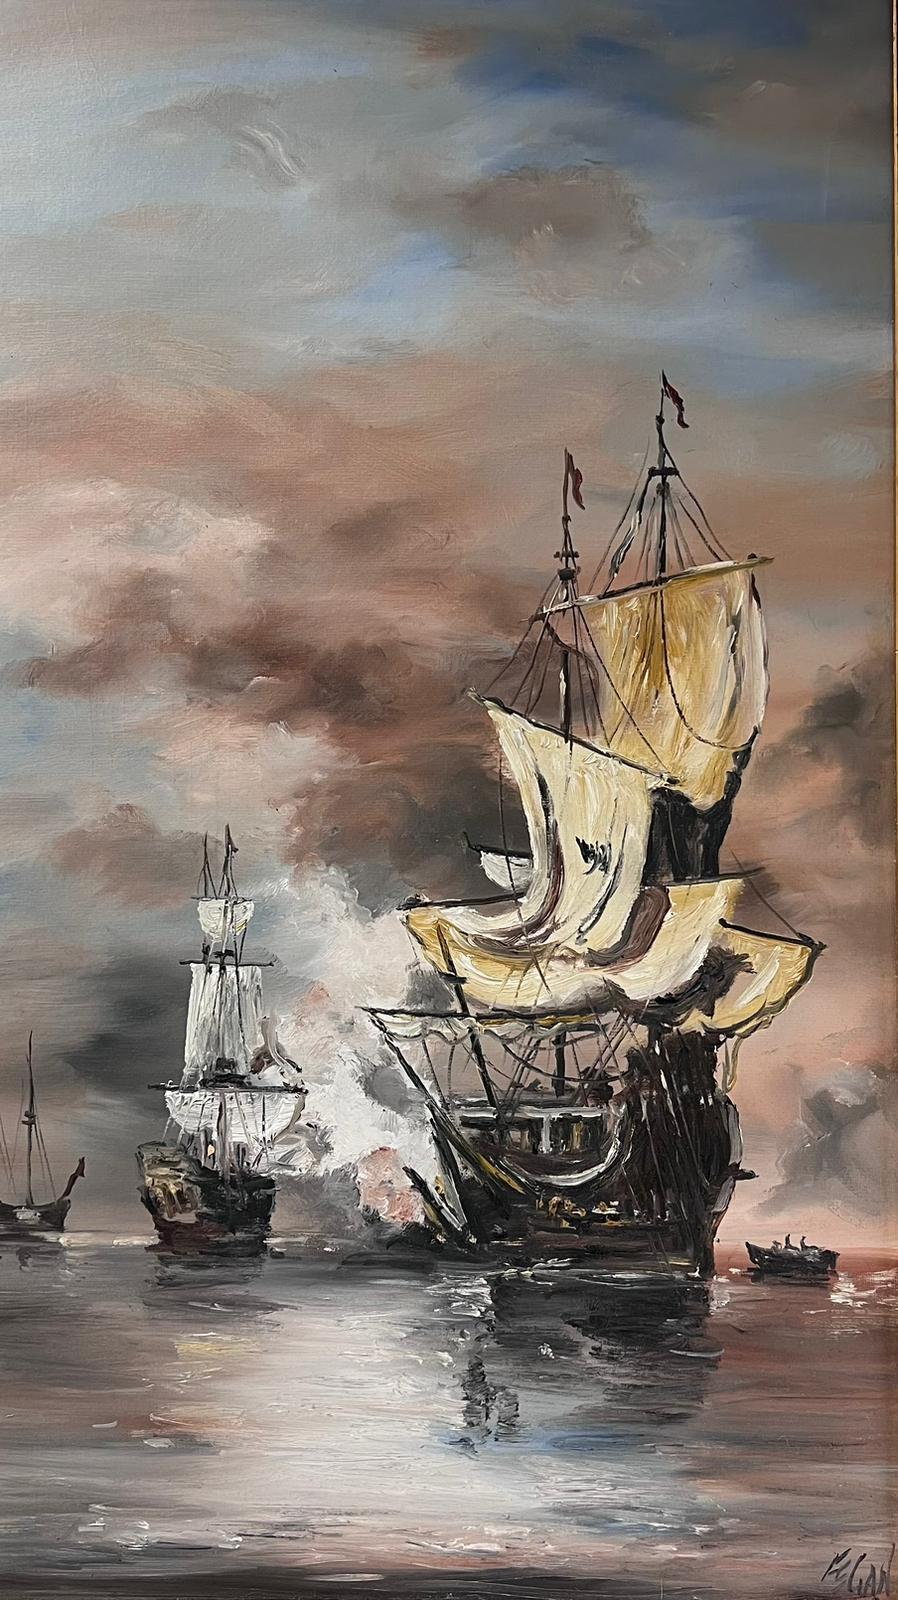 The Naval Battle
by F. C. Fagan, British 20th century
signed oil on board, framed
artists label verso
framed: 35 x 23 inches
board : 30 x 17 inches
provenance: private collection, UK
condition: very good and sound condition 